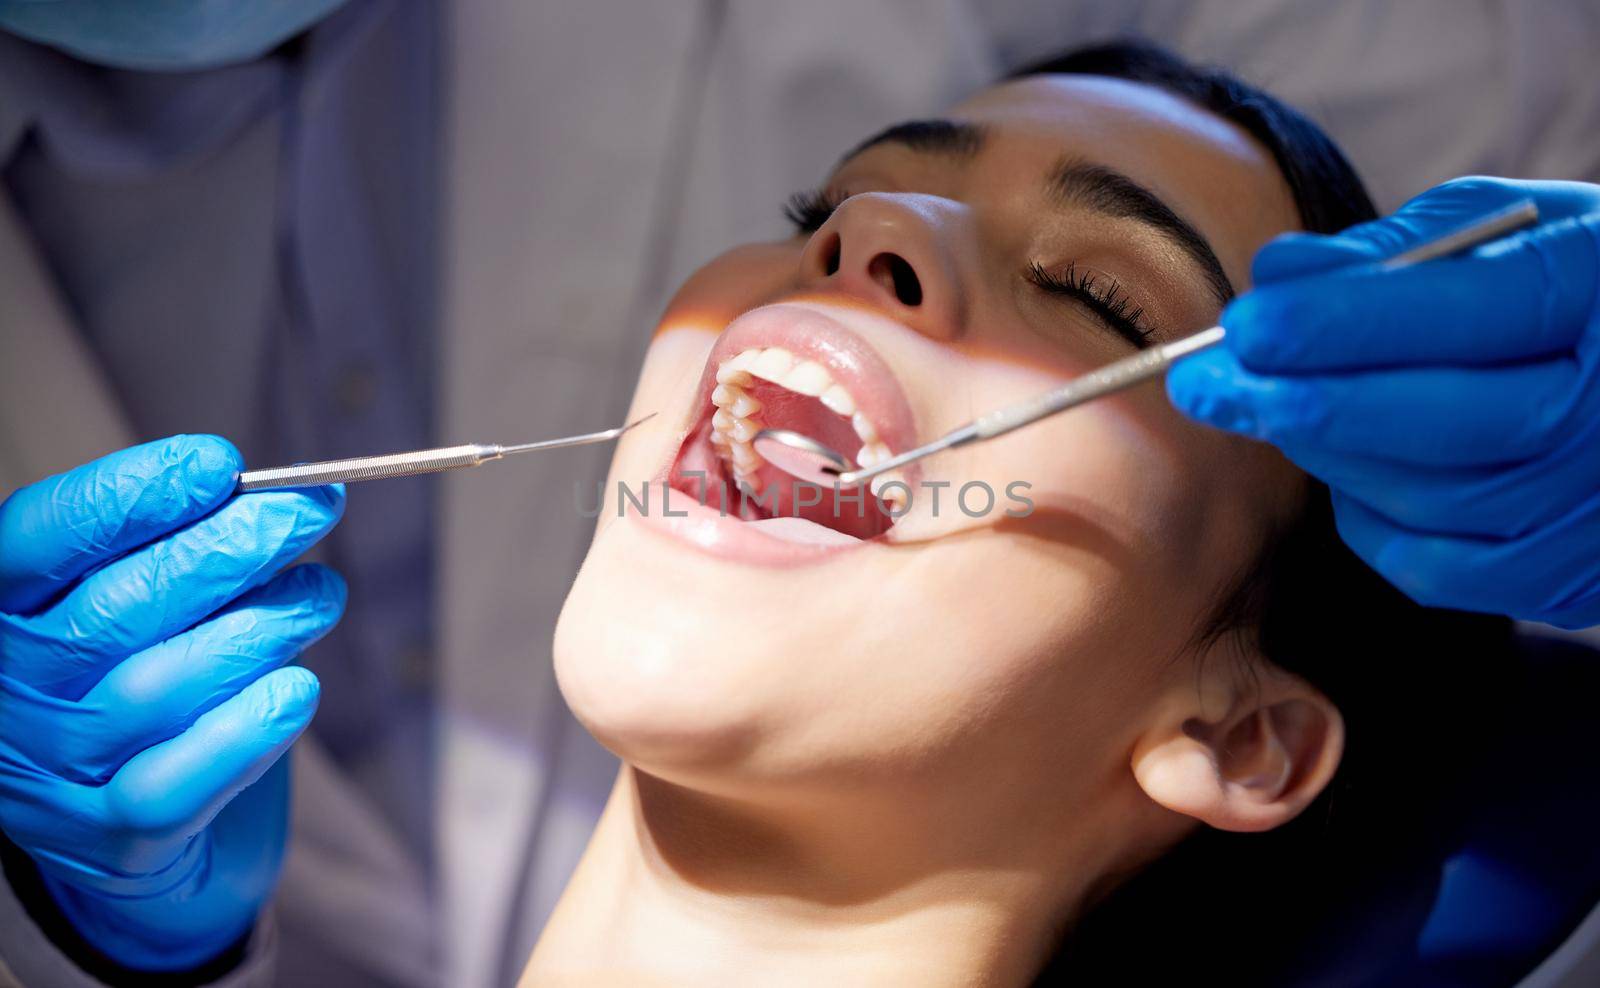 Who knew this would be so relaxing. a young woman having a dental procedure performed on her. by YuriArcurs